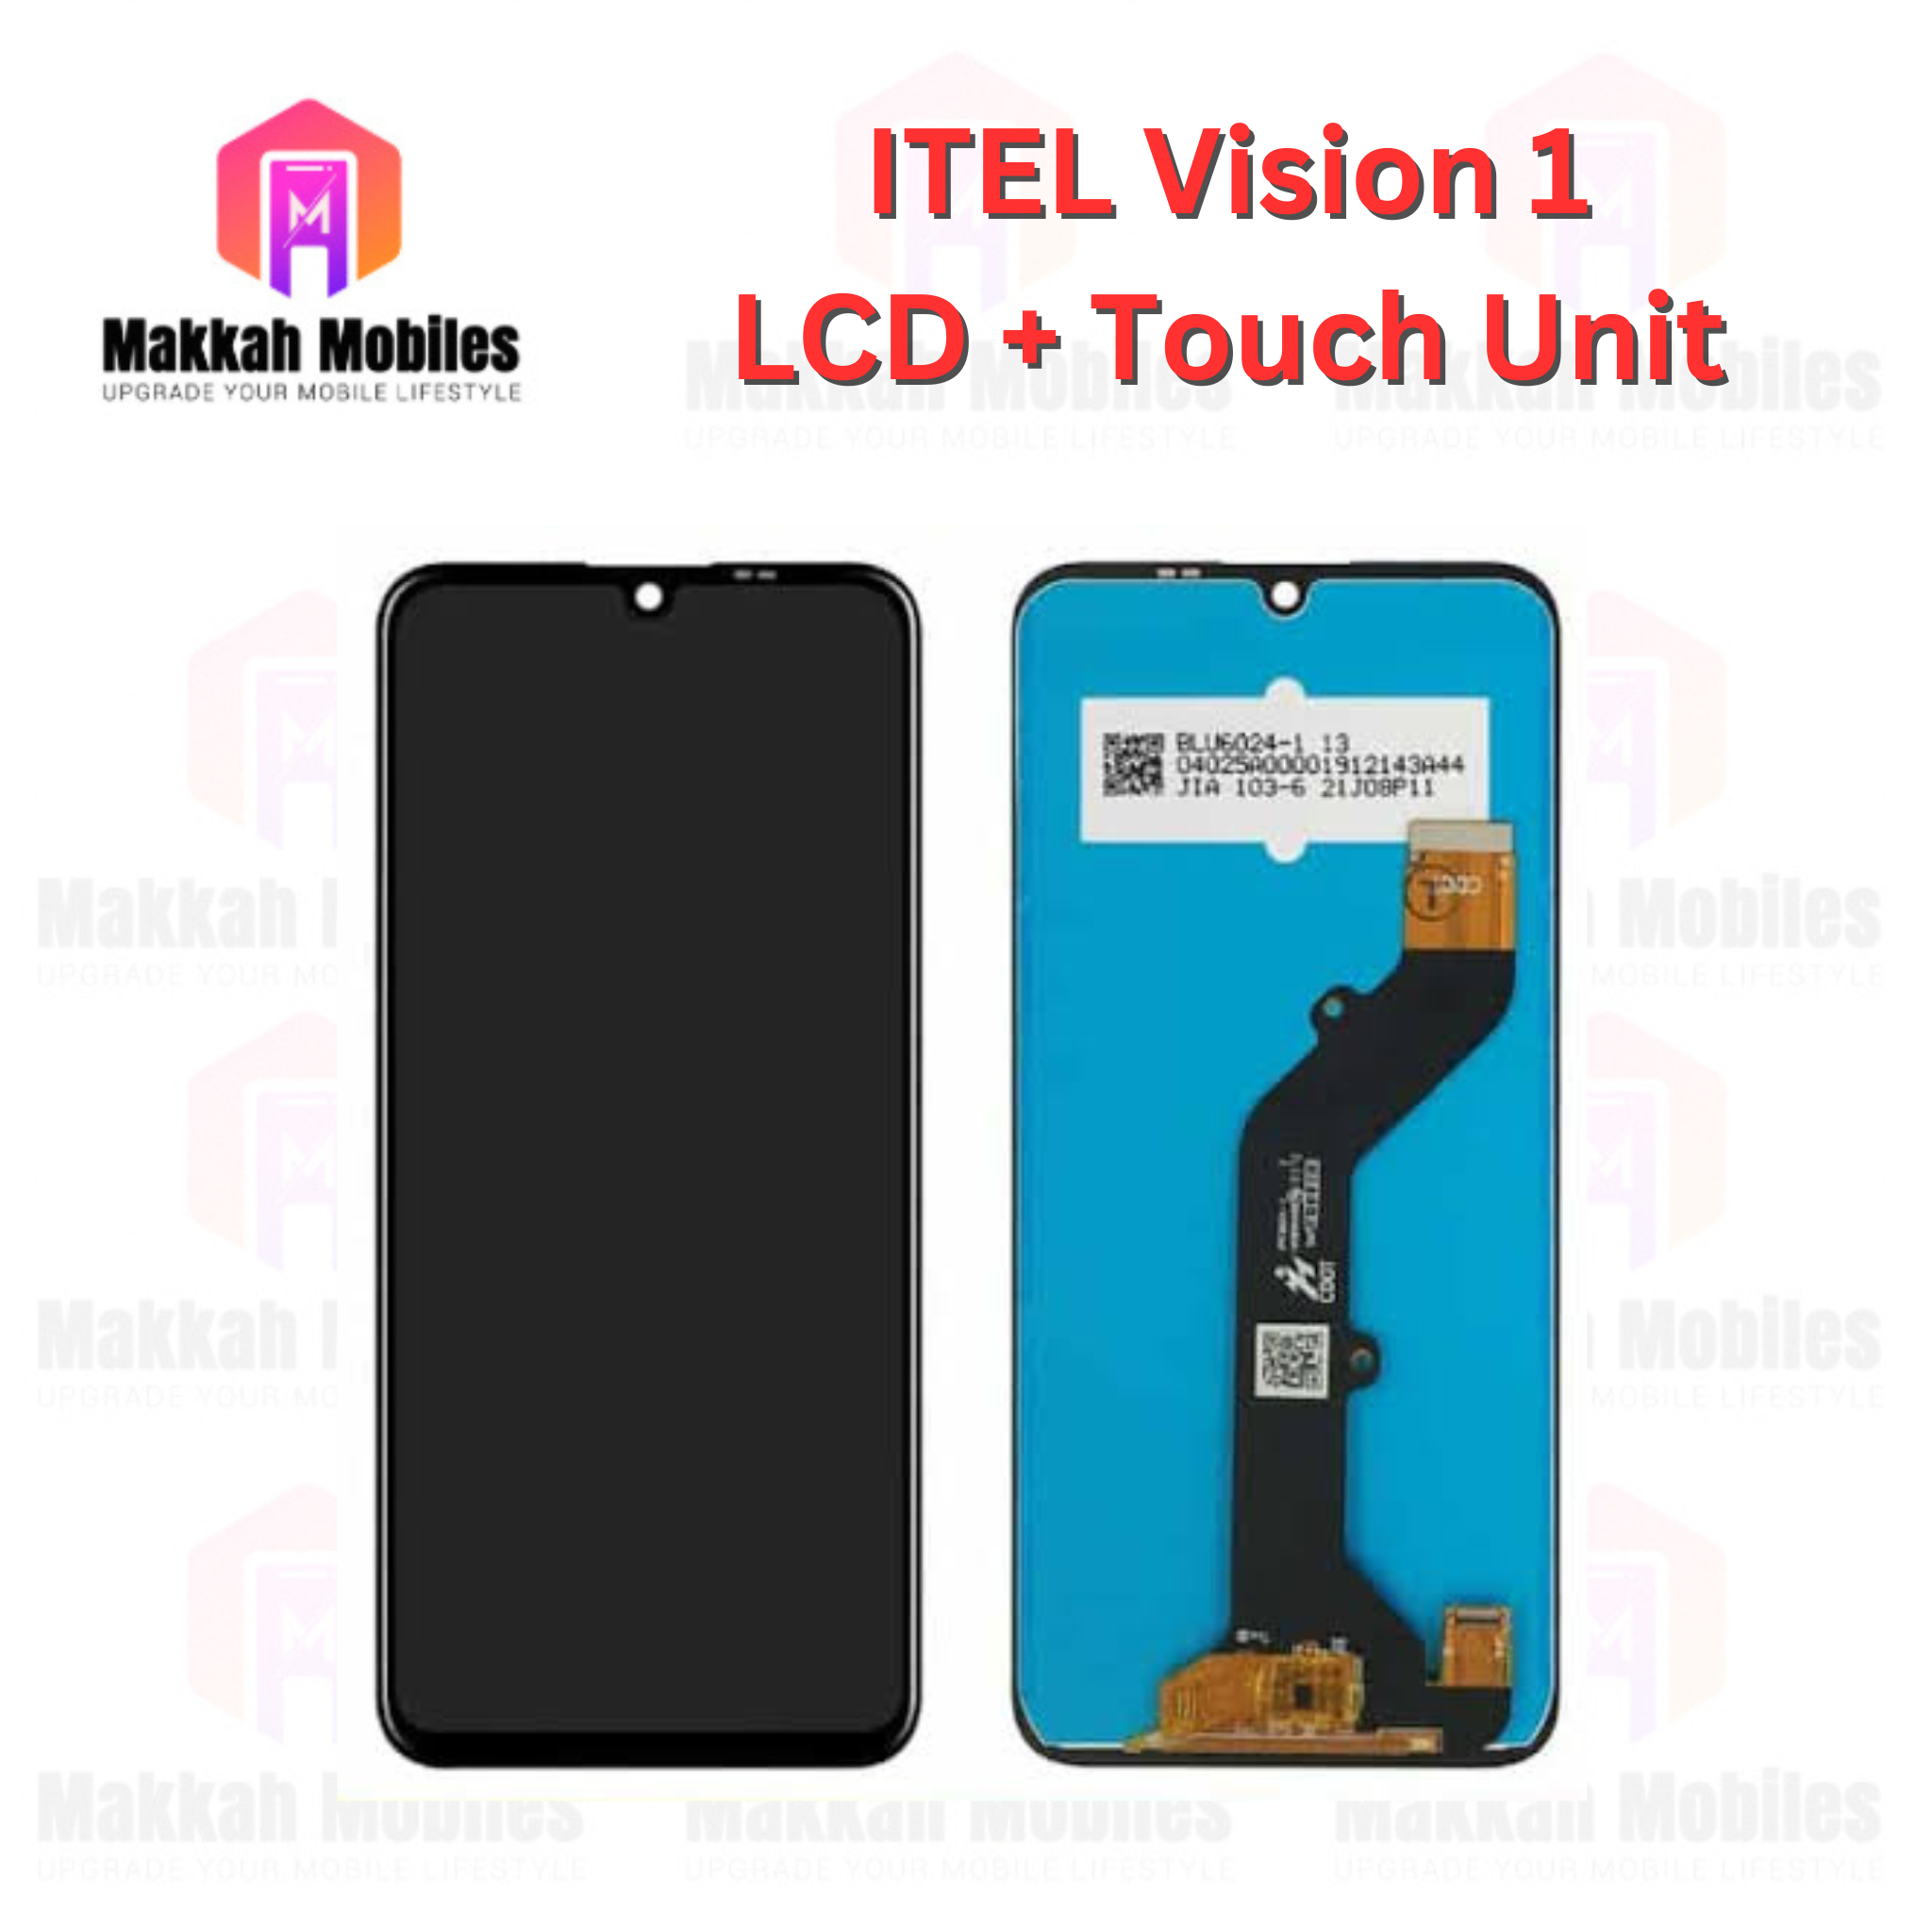 Itel Vision 1 LCD + Touch Complete Panel Unit